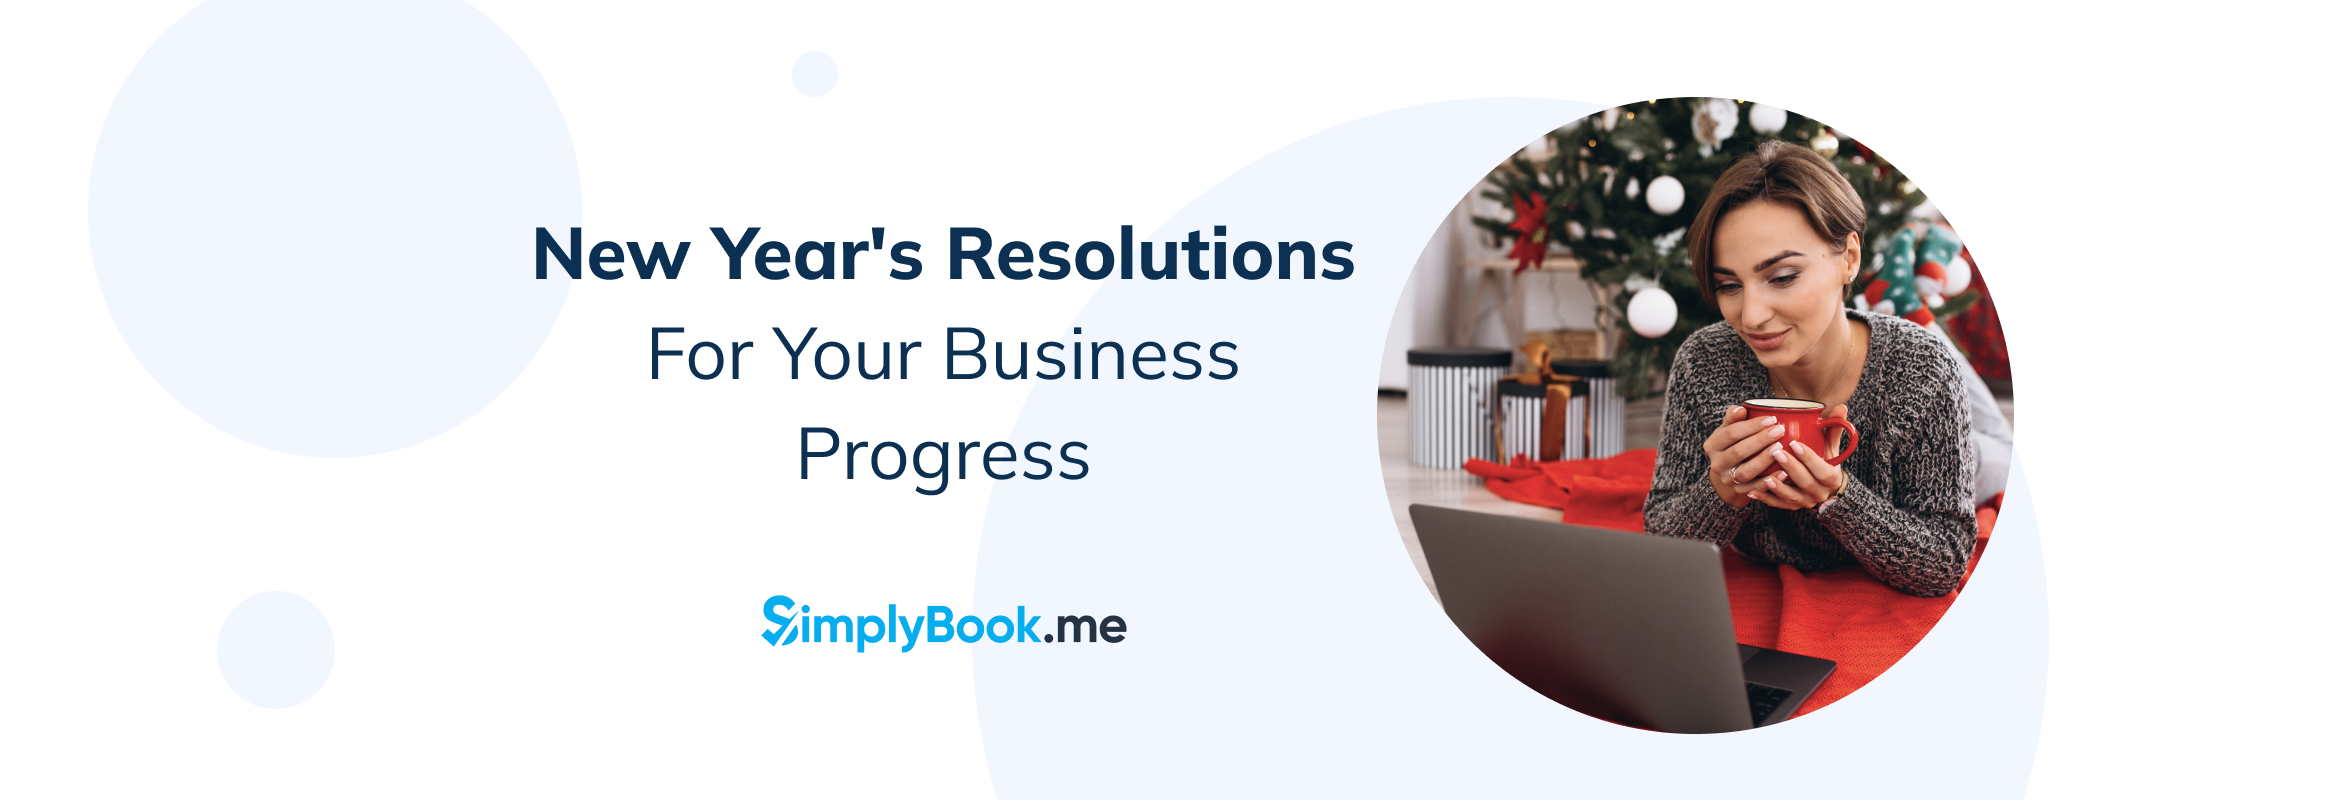 Resolutions for your business progress